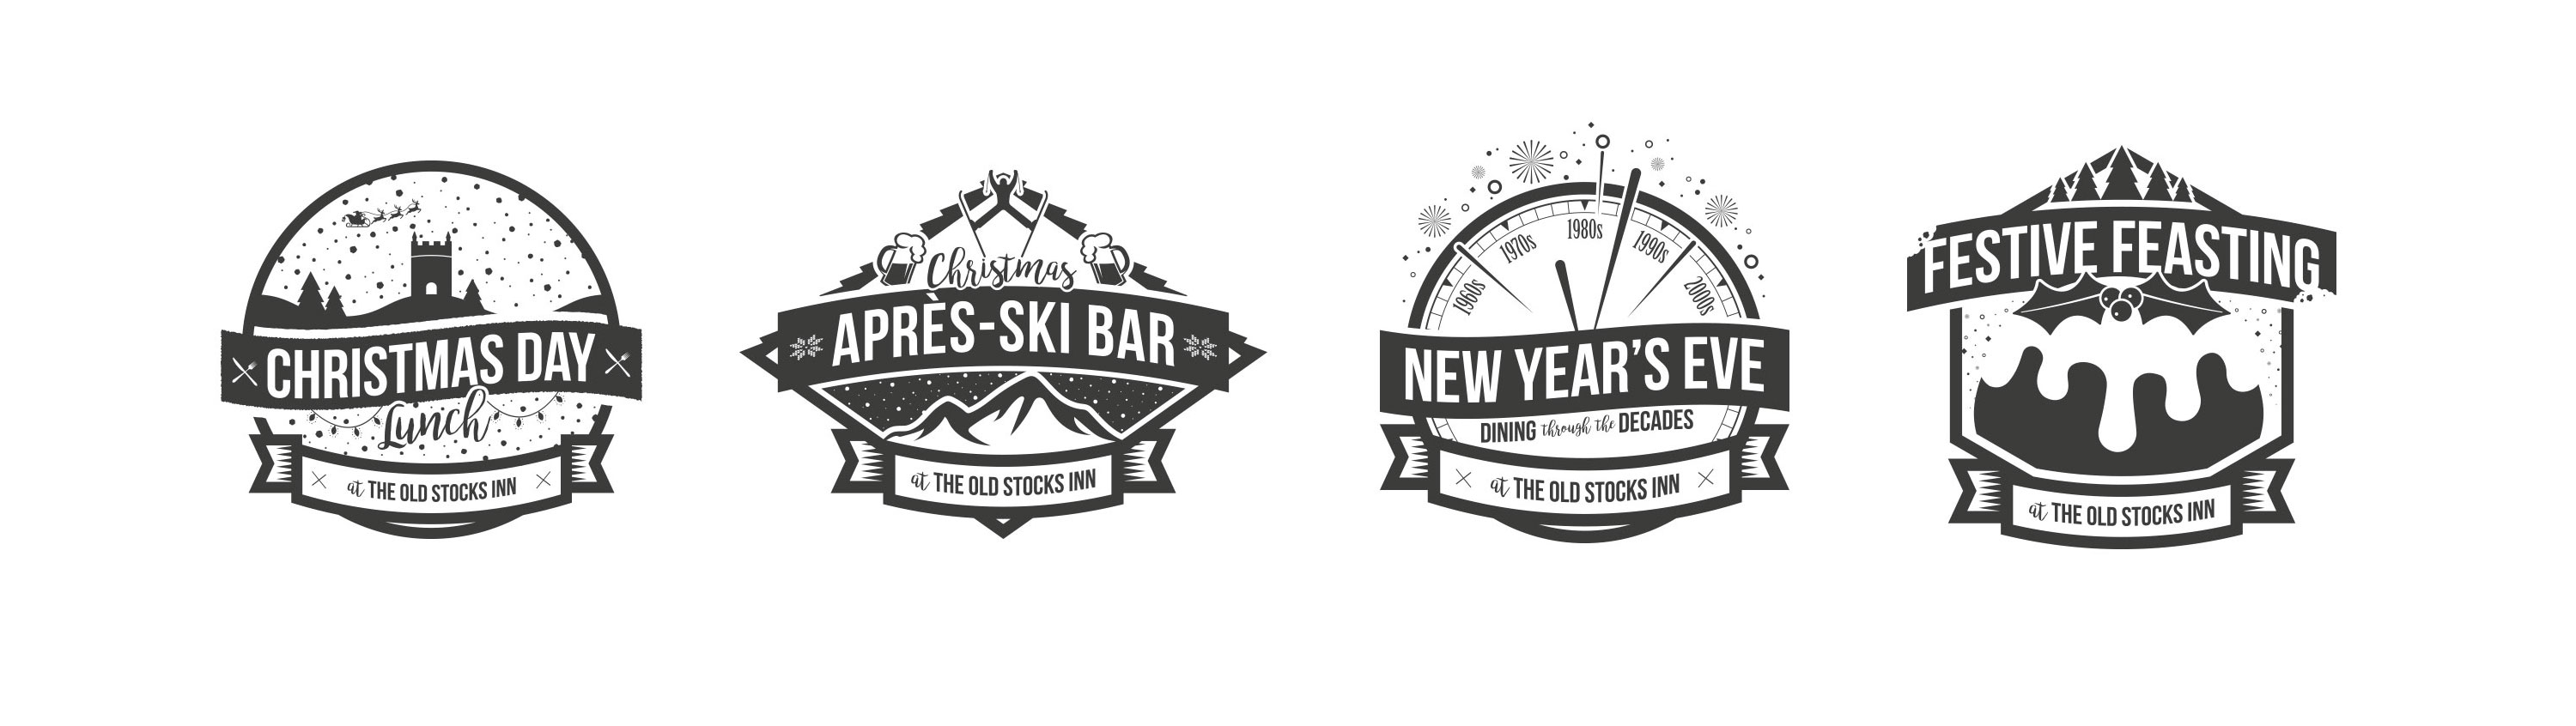 Christmas event icons designed for The Old Stocks Inn by Mighty, hotel marketing agency